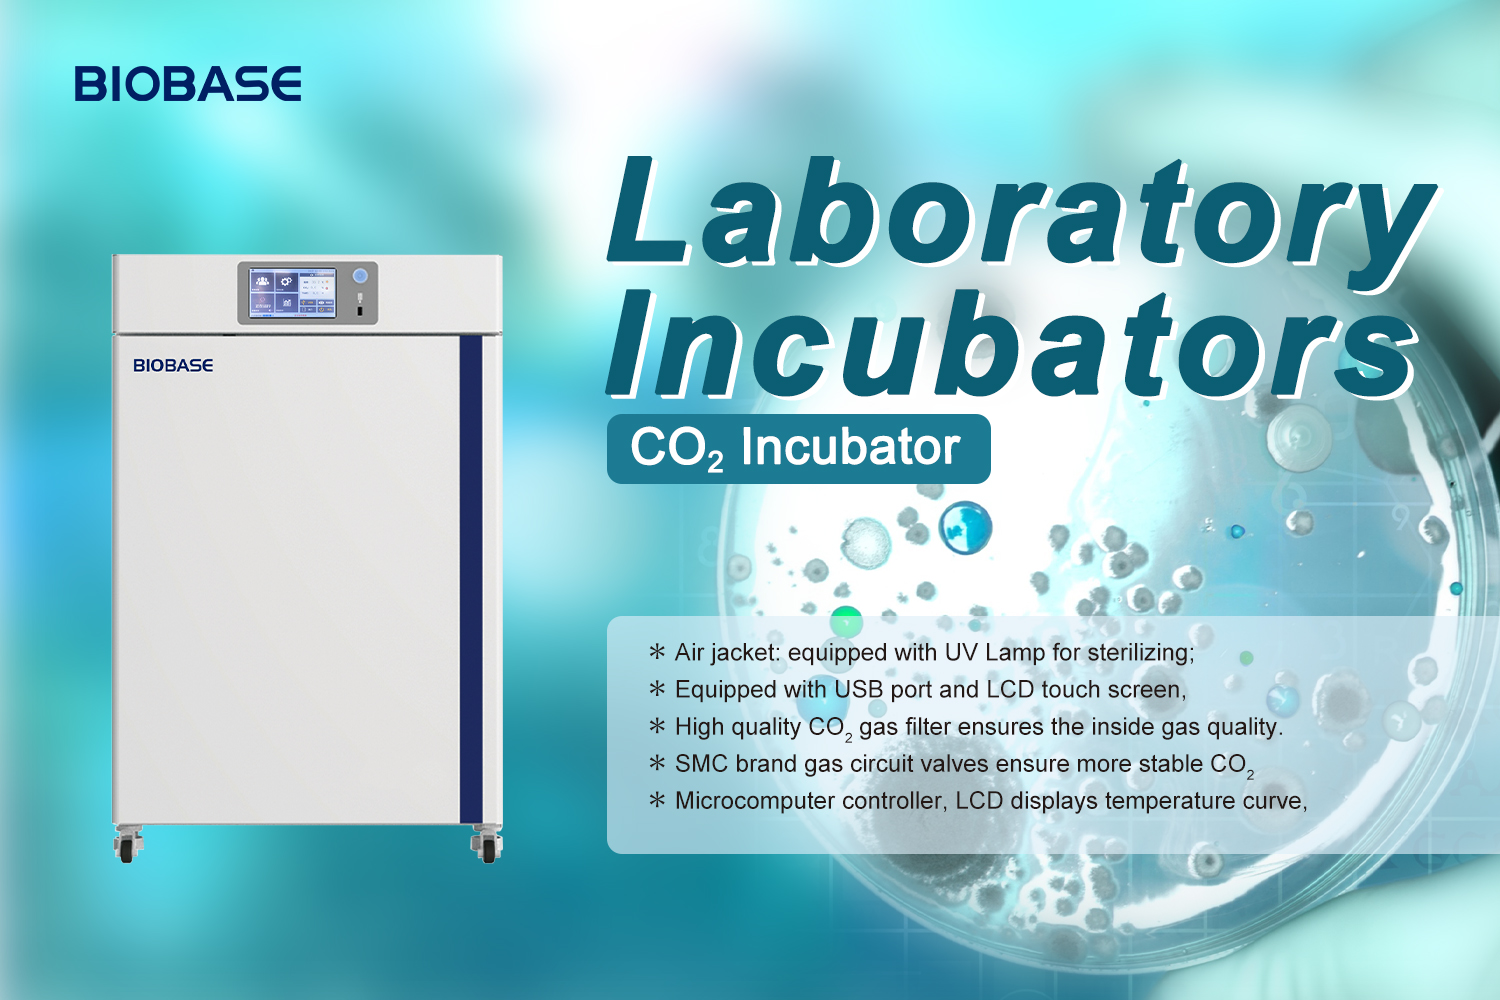 What are laboratory incubators used for?